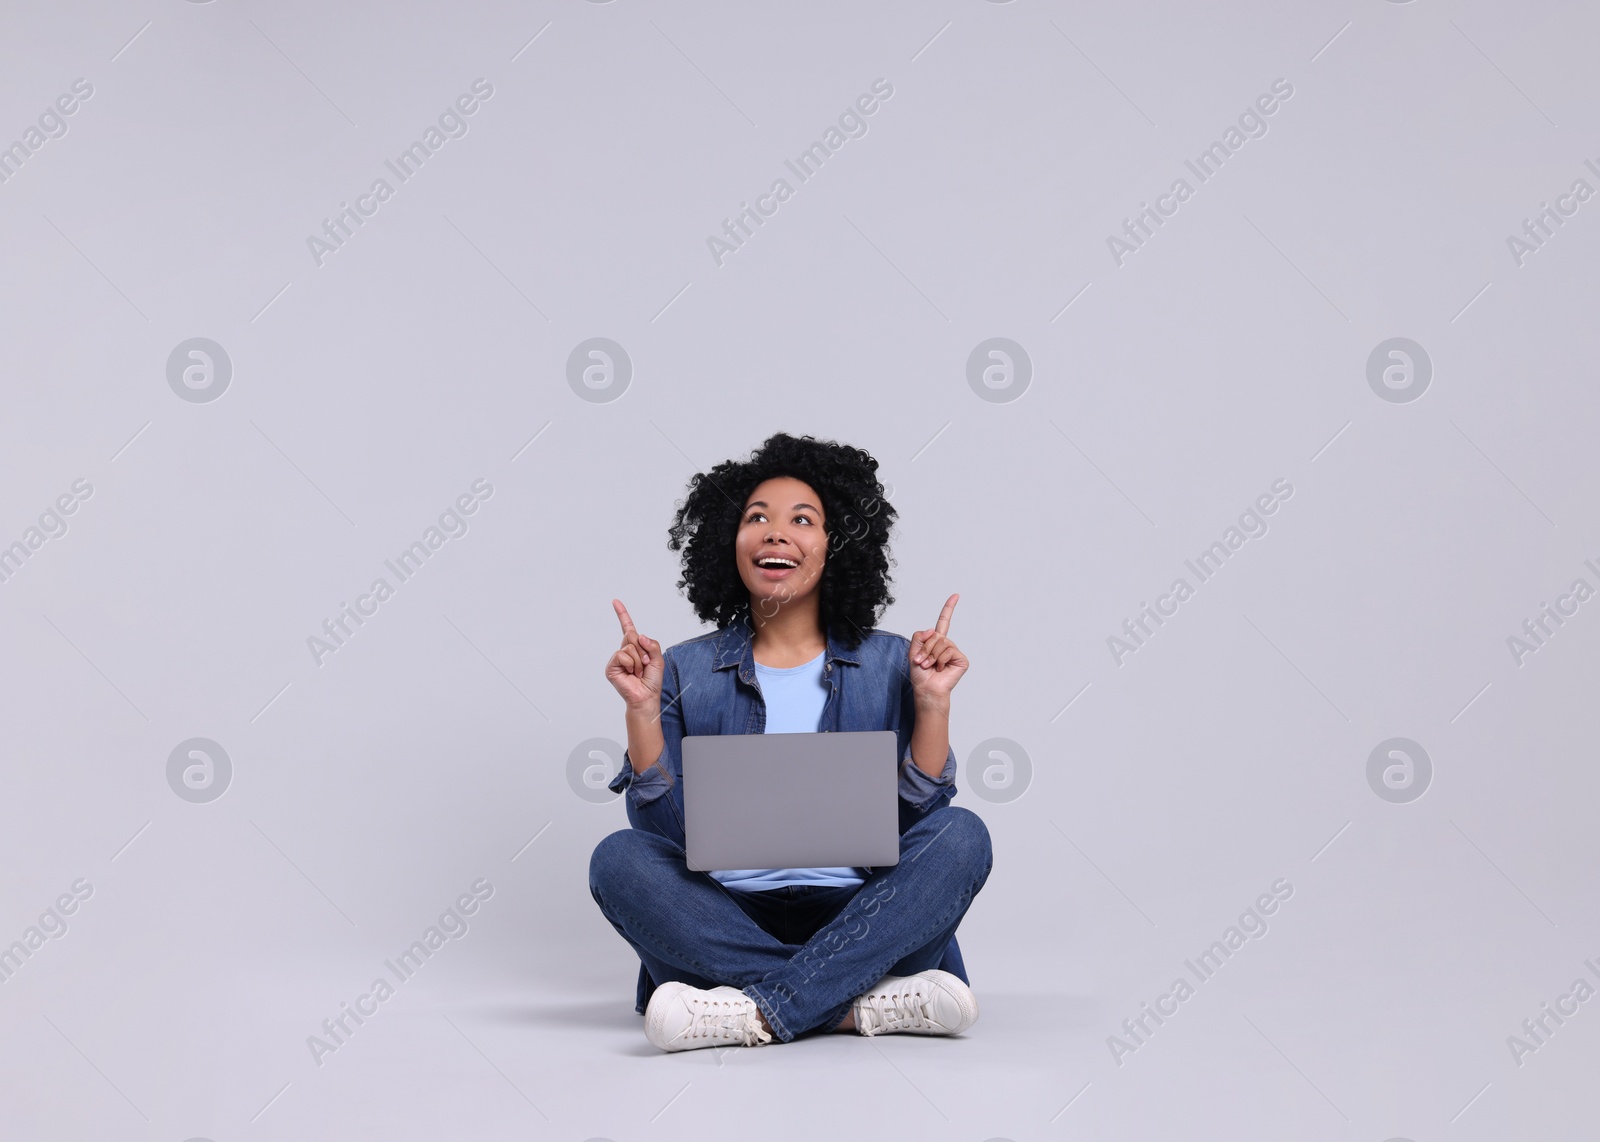 Photo of Happy young woman with laptop pointing at something on light grey background